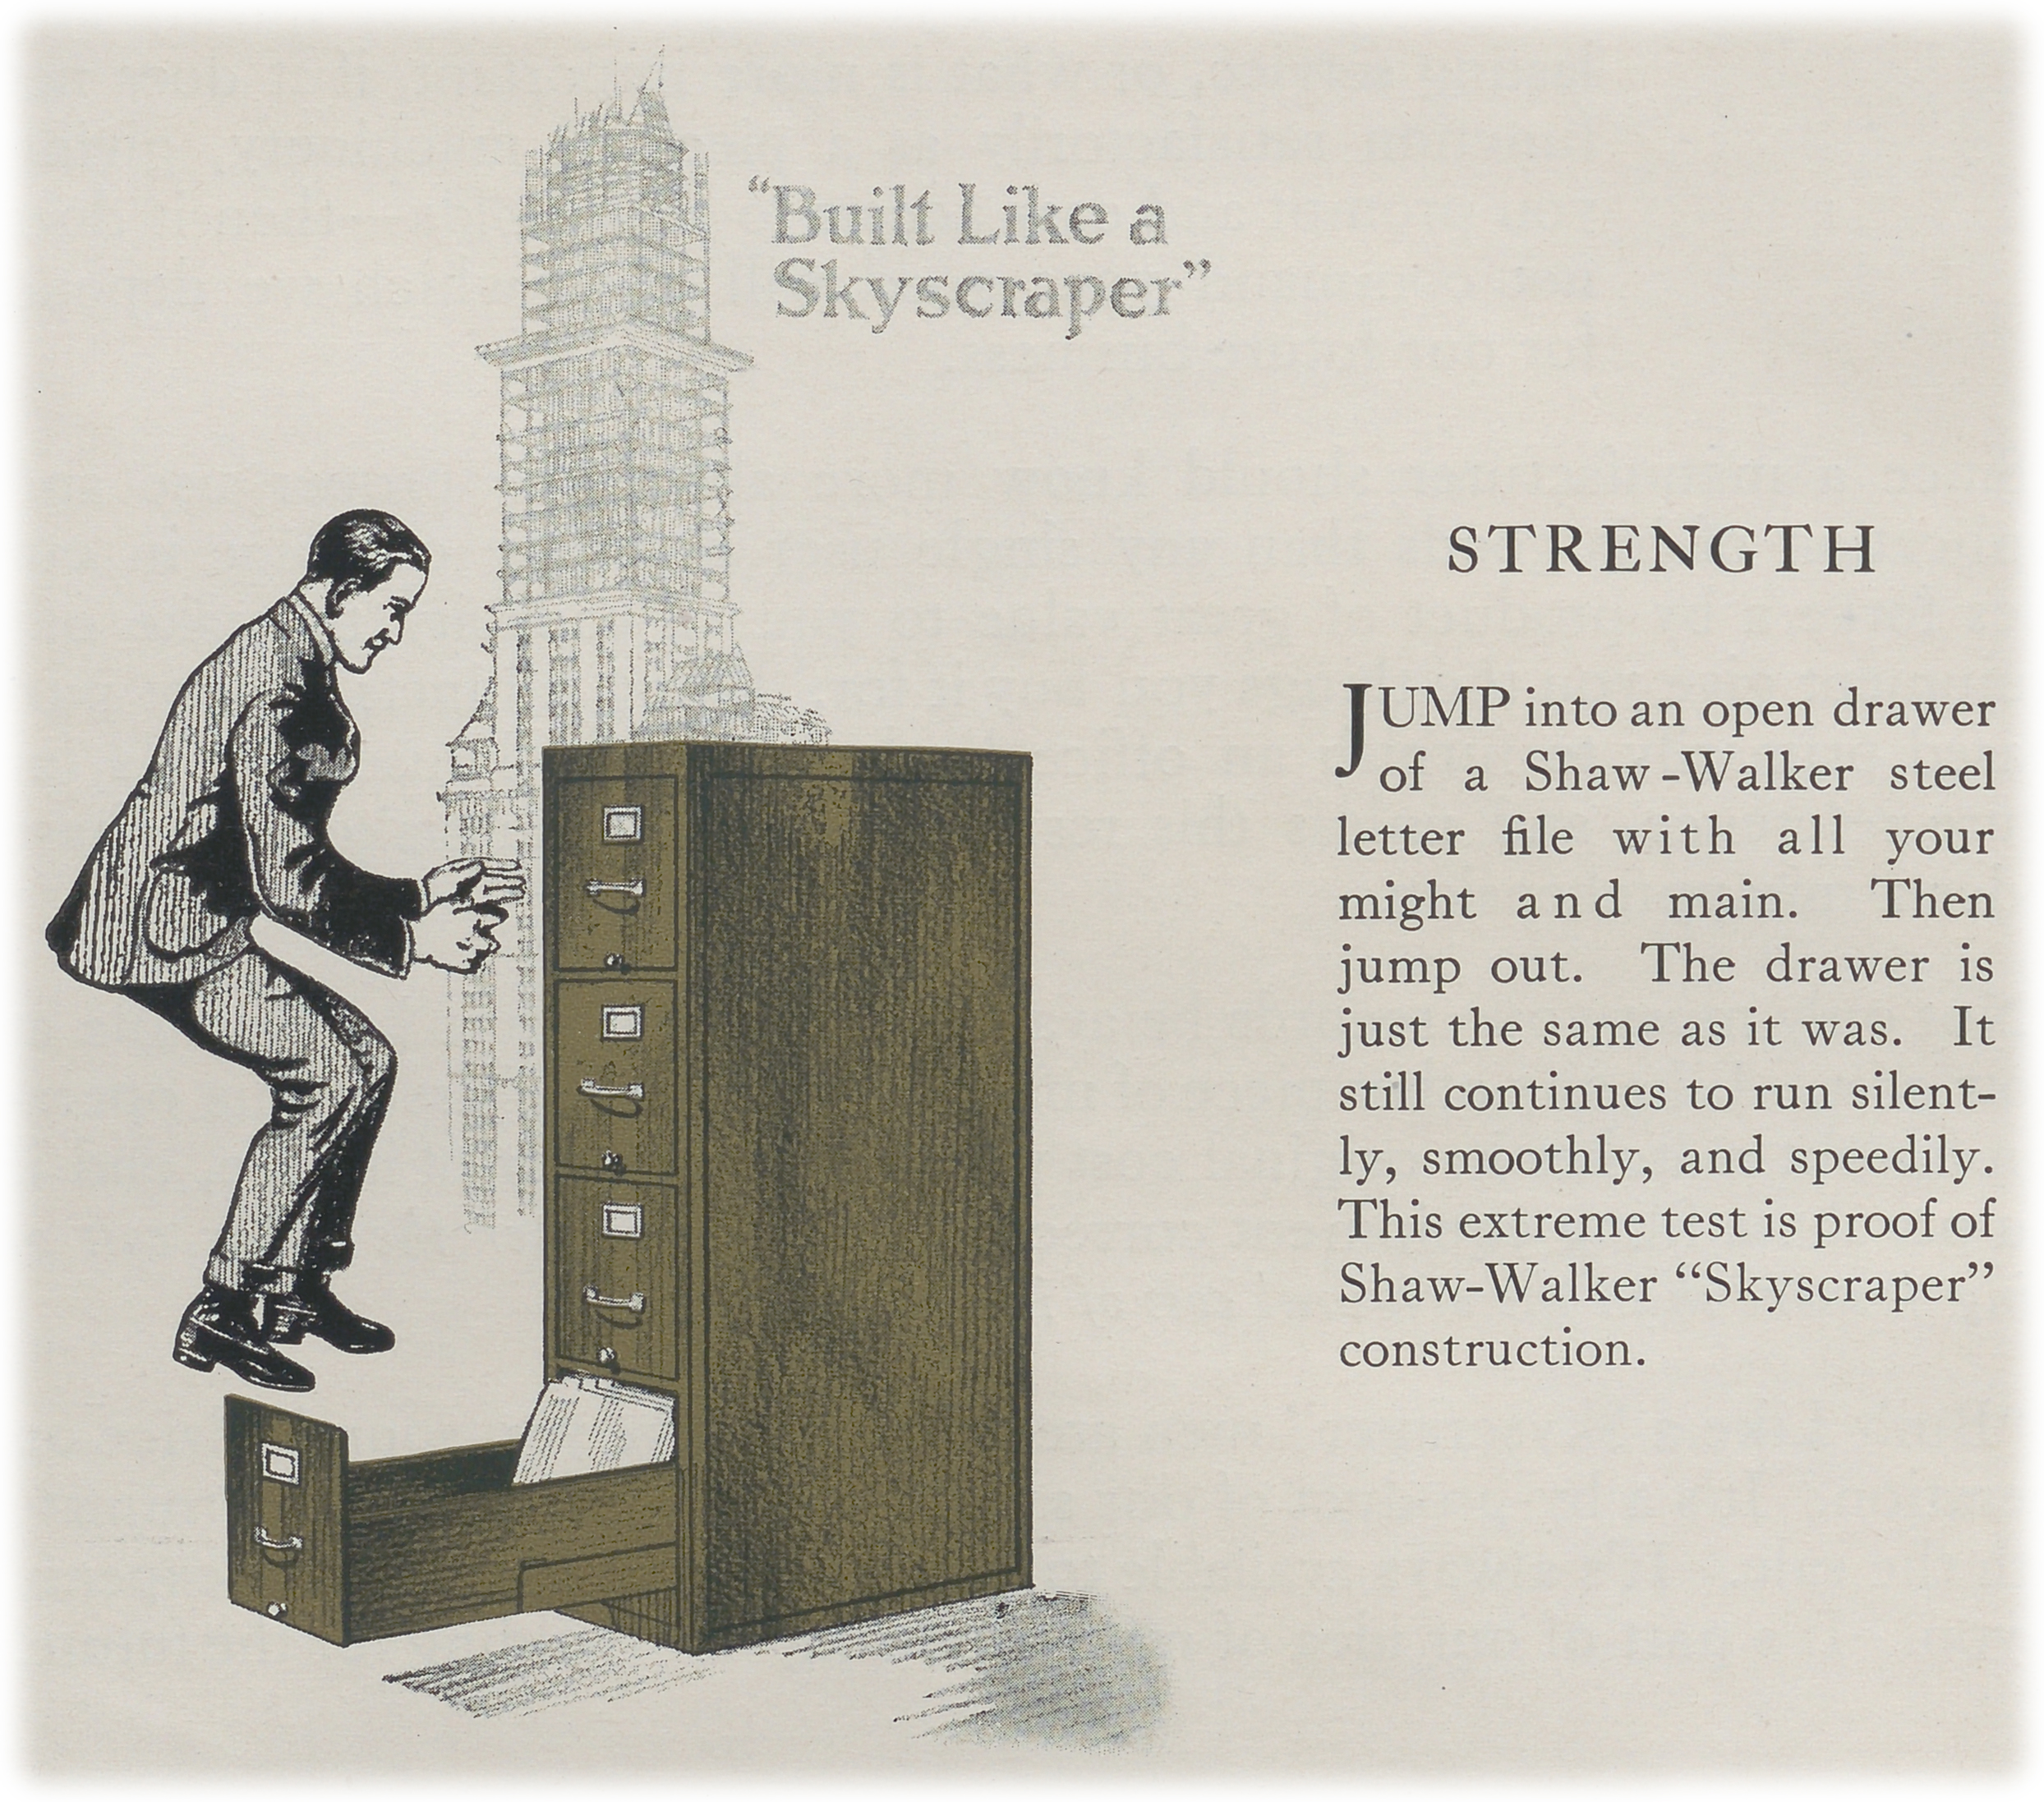 Illustration of a man jumping onto the open drawer of a filing cabinet.